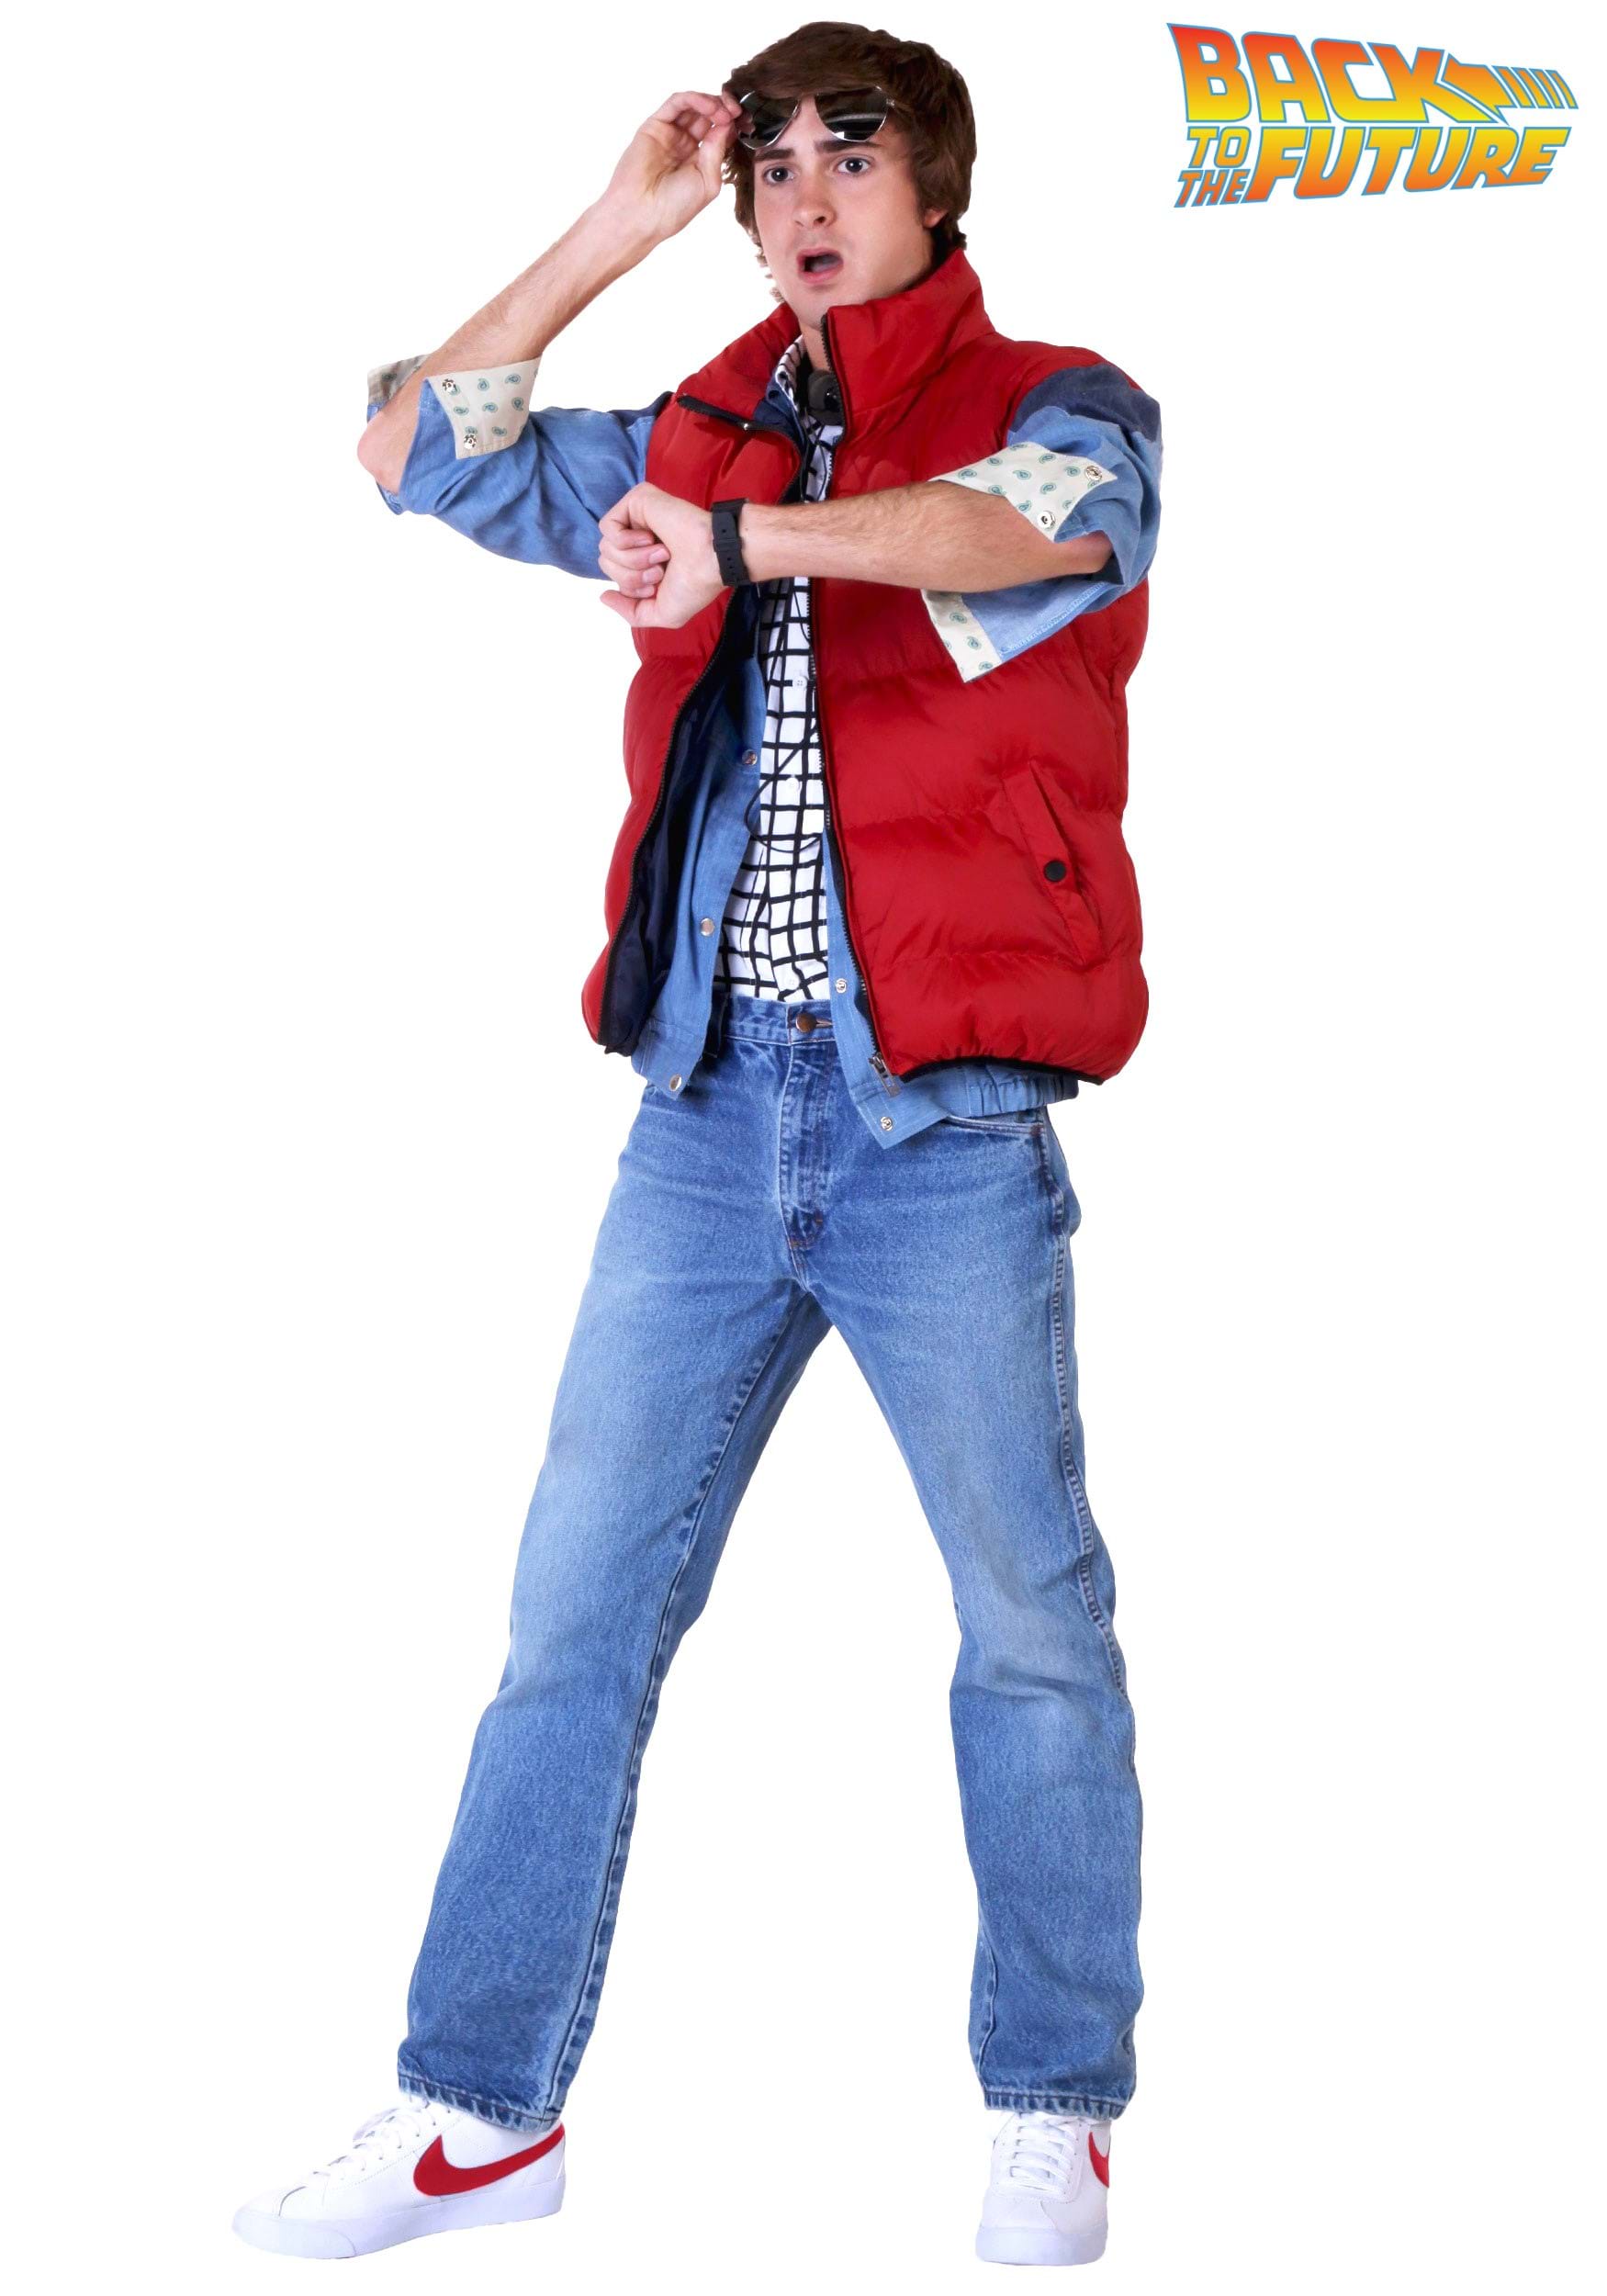 Back to the Future Marty McFly Costume | 80s Movies Costume